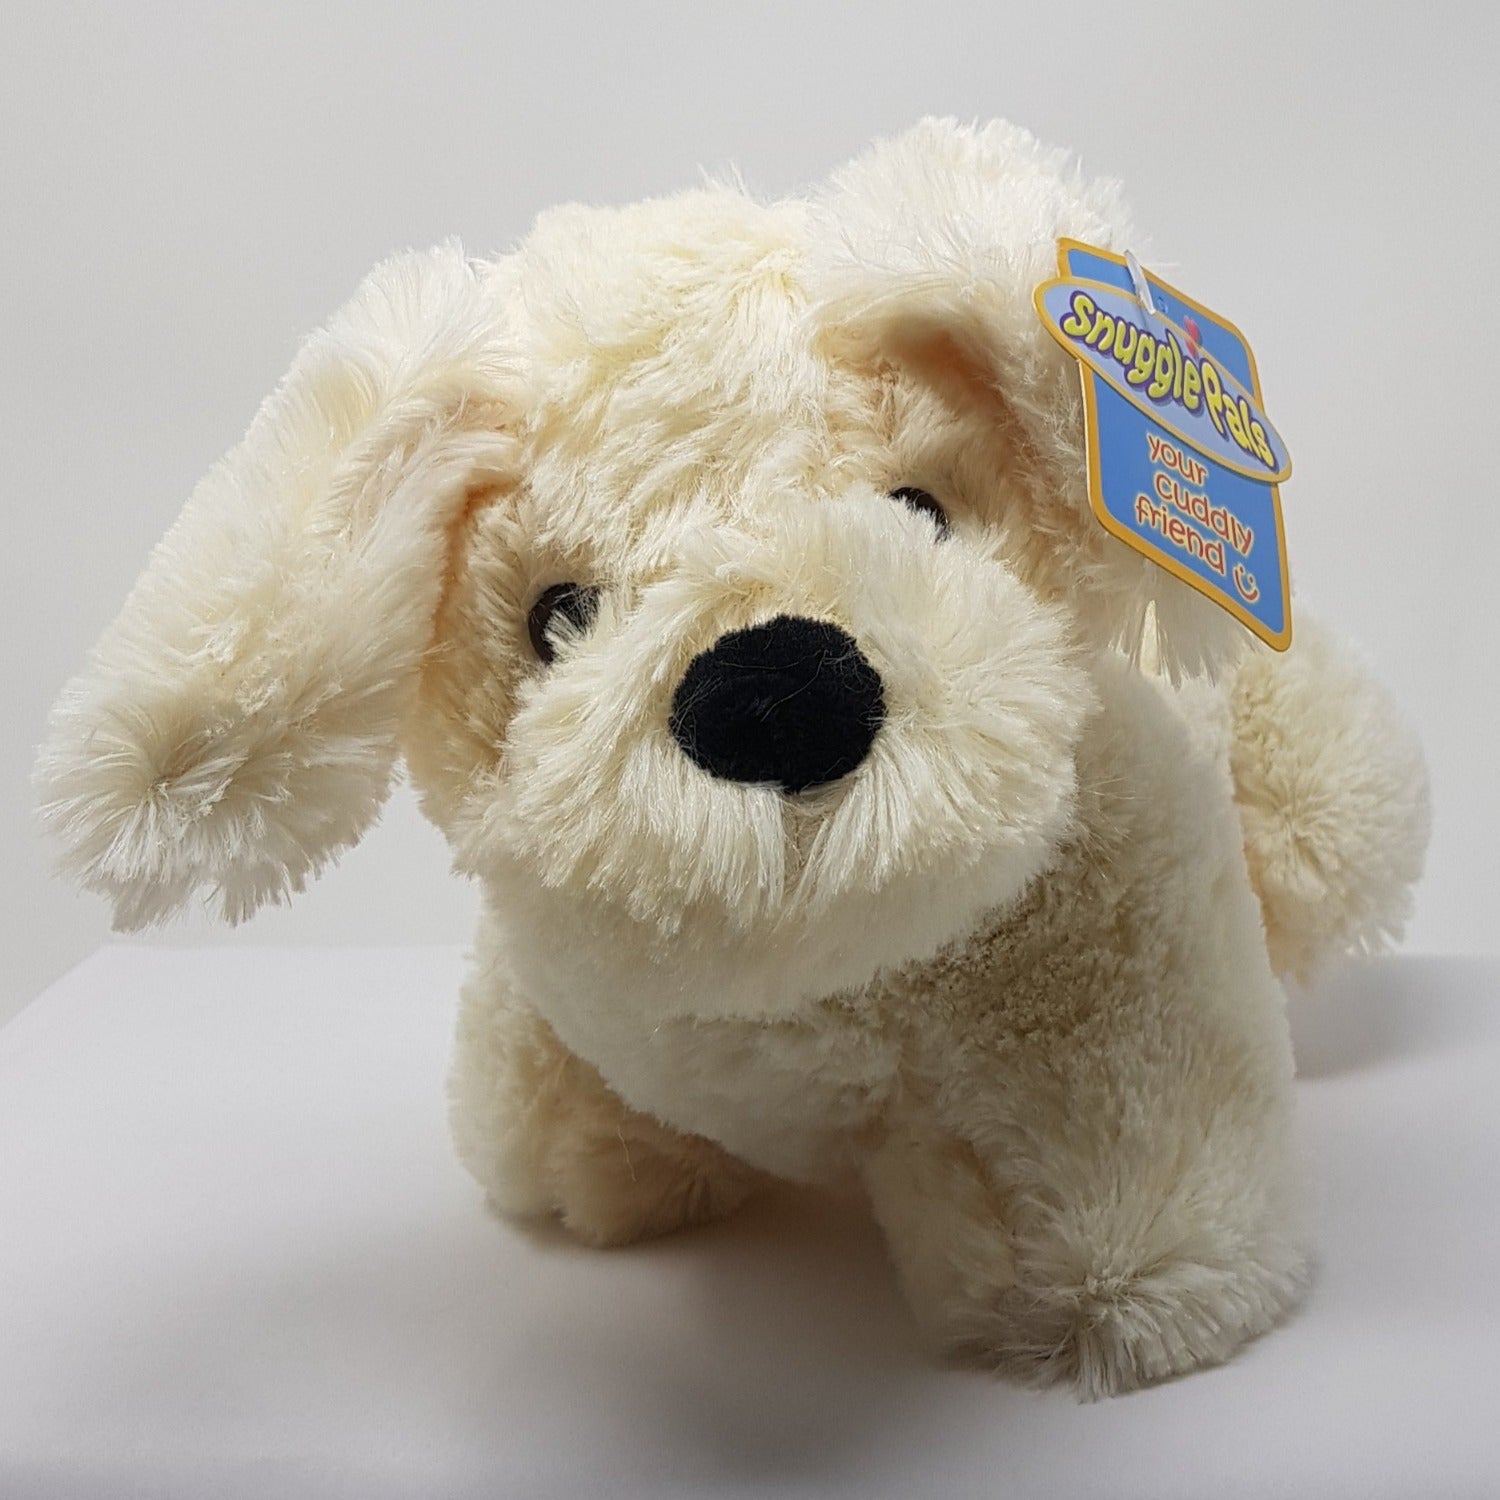 General Gift - Soft Toy / Cute Cuddly White Dog